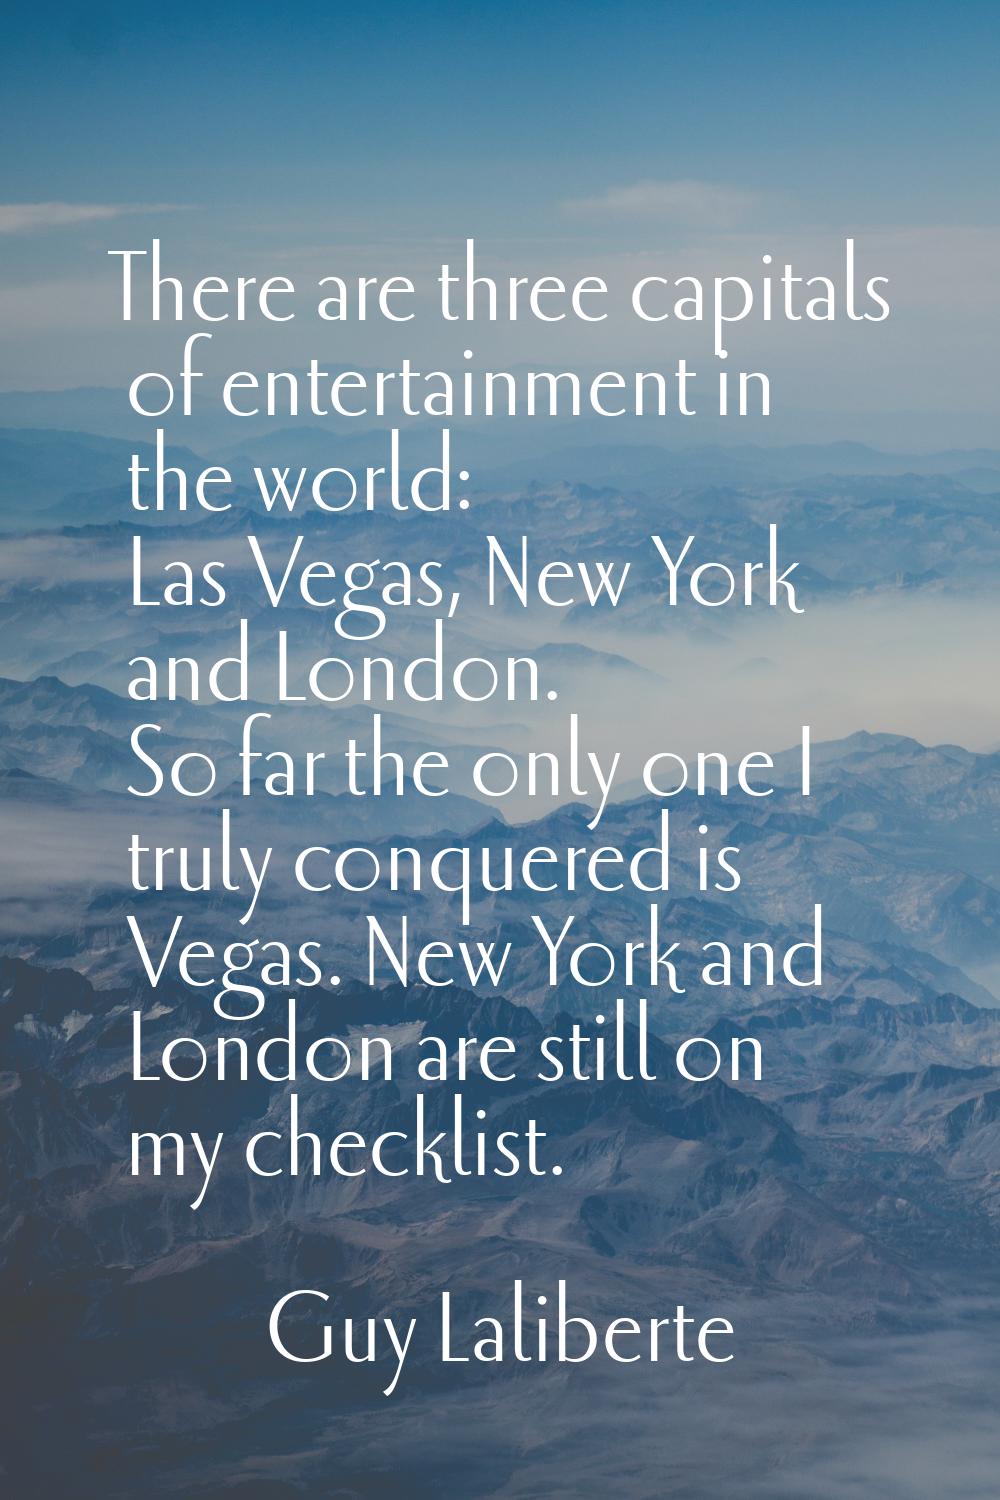 There are three capitals of entertainment in the world: Las Vegas, New York and London. So far the 